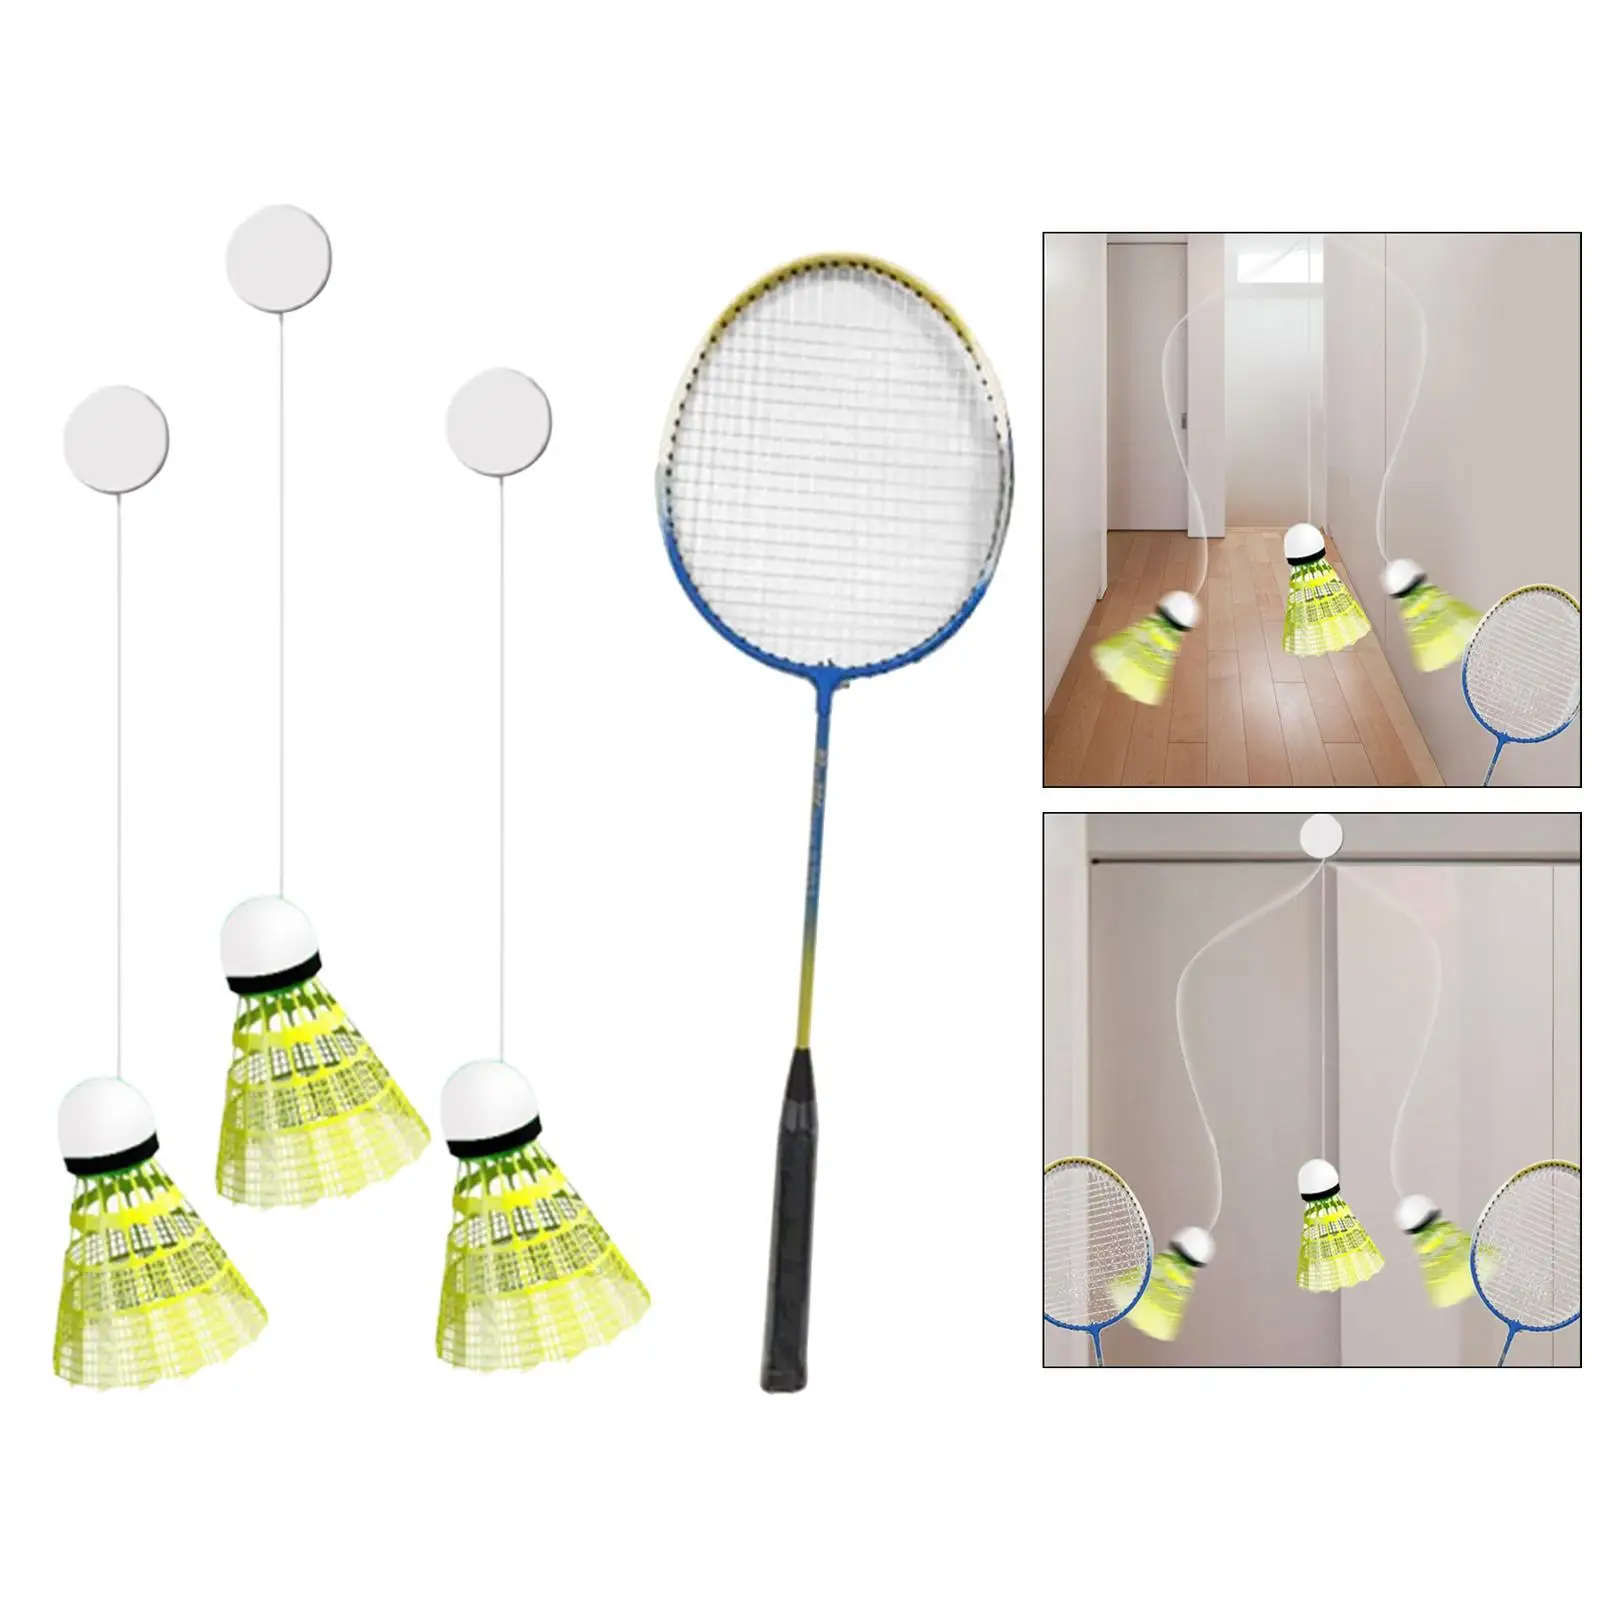 Badminton Solo Trainer, Badminton Training Device Children Aid Tool Portable Adjustable Single Player Practice for Games Home